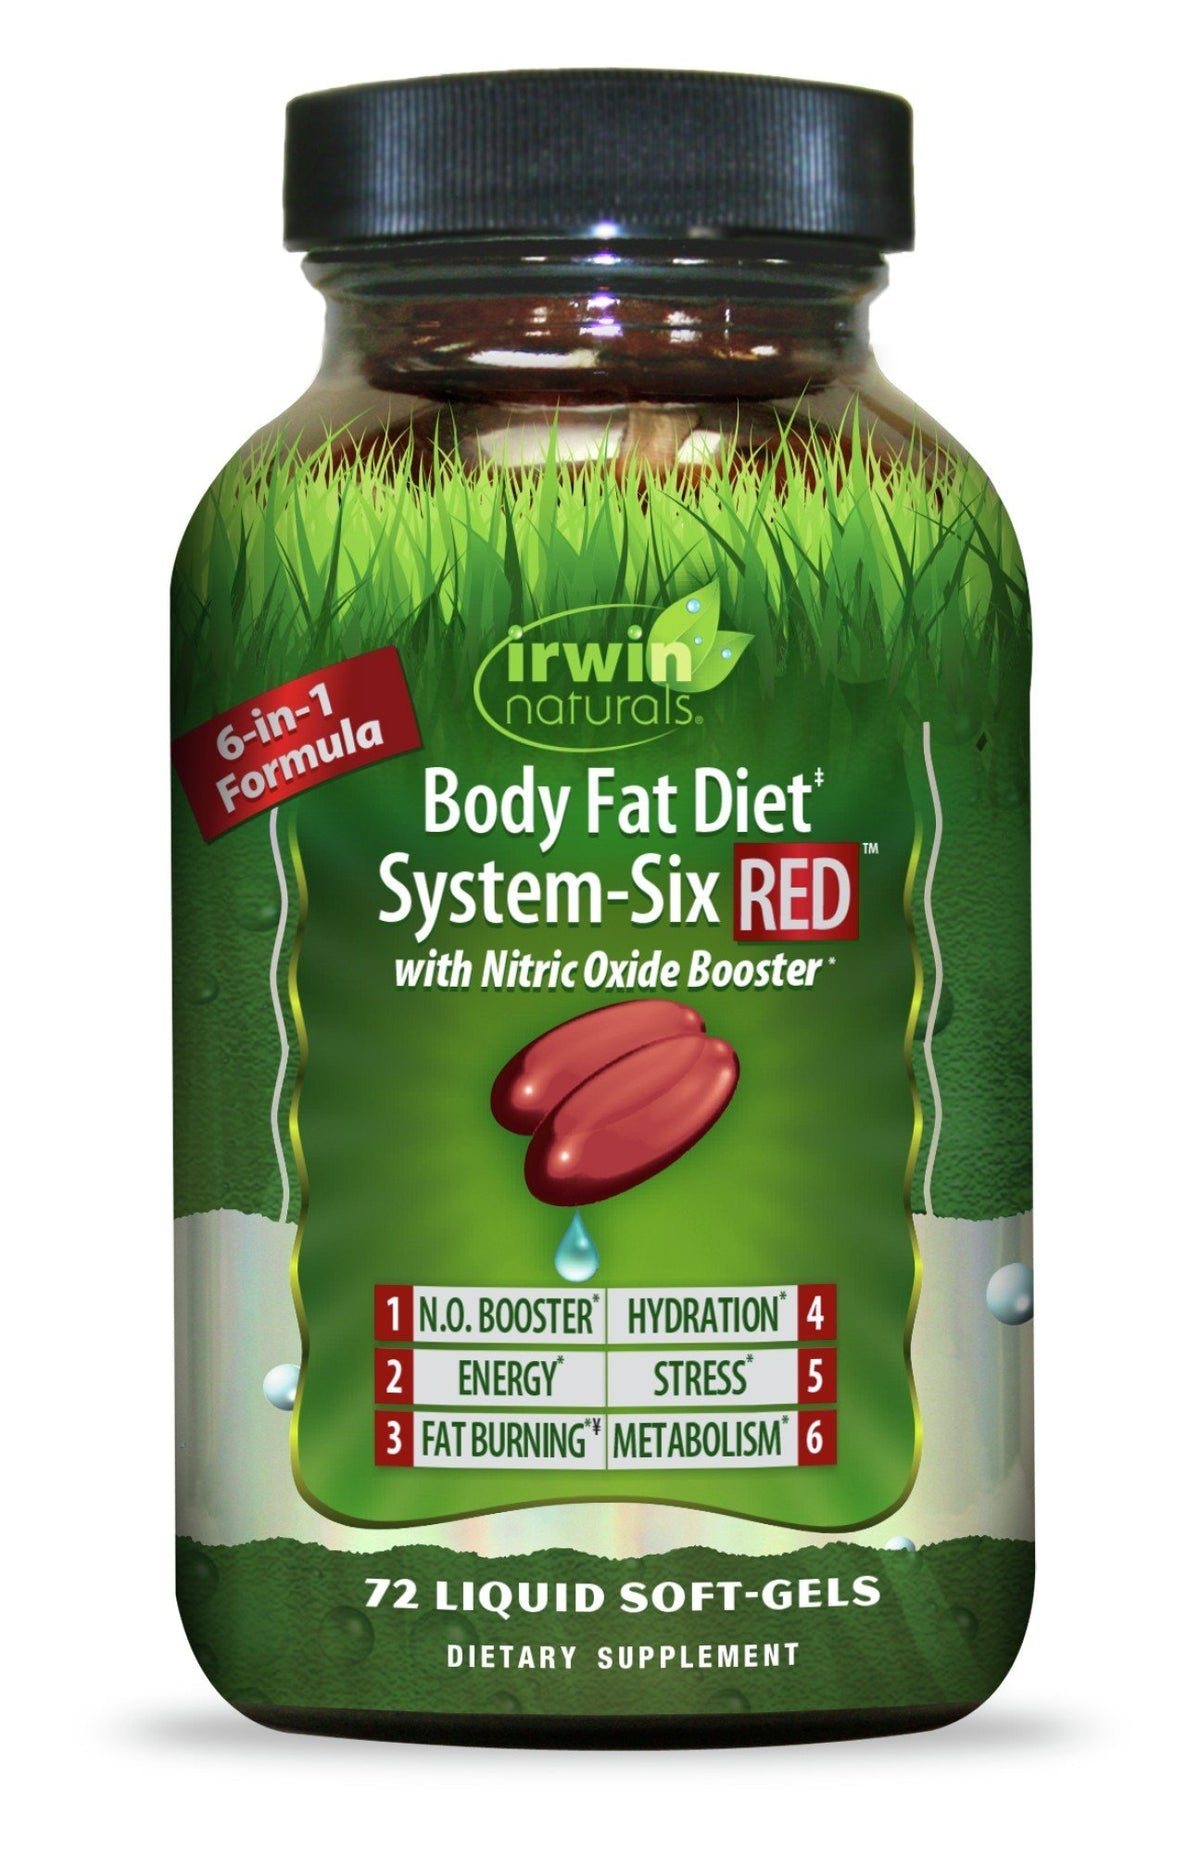 Irwin Naturals Body Fat Diet System Six Red